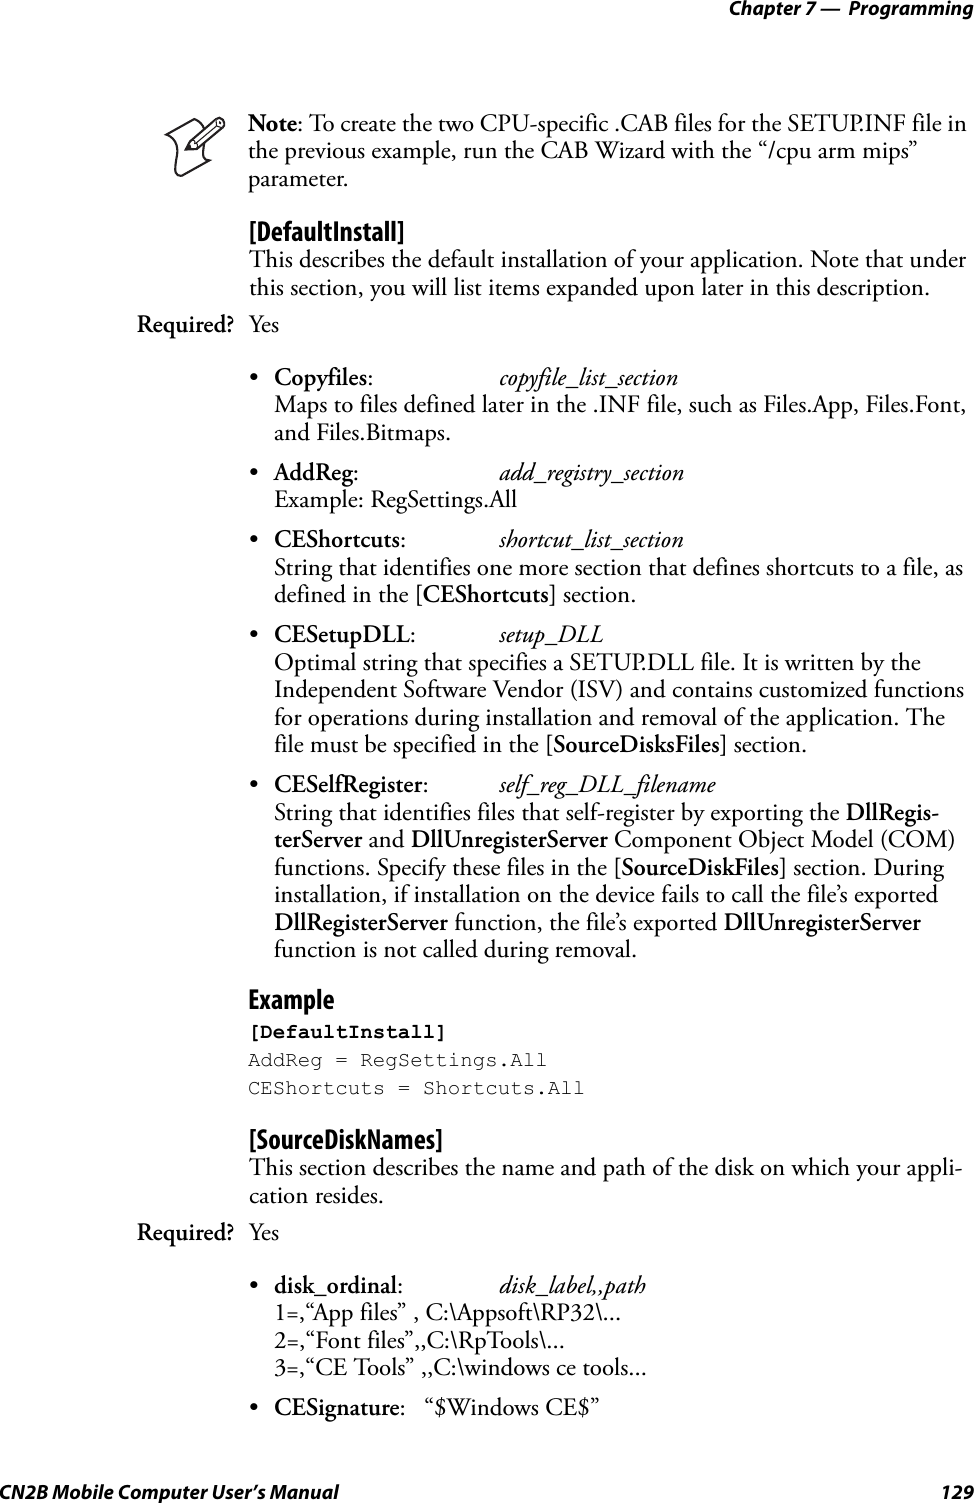 Chapter 7 —  ProgrammingCN2B Mobile Computer User’s Manual 129[DefaultInstall]This describes the default installation of your application. Note that under this section, you will list items expanded upon later in this description.•Copyfiles:copyfile_list_sectionMaps to files defined later in the .INF file, such as Files.App, Files.Font, and Files.Bitmaps.•AddReg:add_registry_sectionExample: RegSettings.All•CEShortcuts:shortcut_list_sectionString that identifies one more section that defines shortcuts to a file, as defined in the [CEShortcuts] section.•CESetupDLL:setup_DLLOptimal string that specifies a SETUP.DLL file. It is written by the Independent Software Vendor (ISV) and contains customized functions for operations during installation and removal of the application. The file must be specified in the [SourceDisksFiles] section.•CESelfRegister:self_reg_DLL_filenameString that identifies files that self-register by exporting the DllRegis-terServer and DllUnregisterServer Component Object Model (COM) functions. Specify these files in the [SourceDiskFiles] section. During installation, if installation on the device fails to call the file’s exported DllRegisterServer function, the file’s exported DllUnregisterServer function is not called during removal.Example[DefaultInstall]AddReg = RegSettings.AllCEShortcuts = Shortcuts.All[SourceDiskNames]This section describes the name and path of the disk on which your appli-cation resides.•disk_ordinal:disk_label,,path1=,“App files” , C:\Appsoft\RP32\...2=,“Font files”,,C:\RpTools\...3=,“CE Tools” ,,C:\windows ce tools...•CESignature: “$Windows CE$”Note: To create the two CPU-specific .CAB files for the SETUP.INF file in the previous example, run the CAB Wizard with the “/cpu arm mips” parameter.Required? YesRequired? Yes